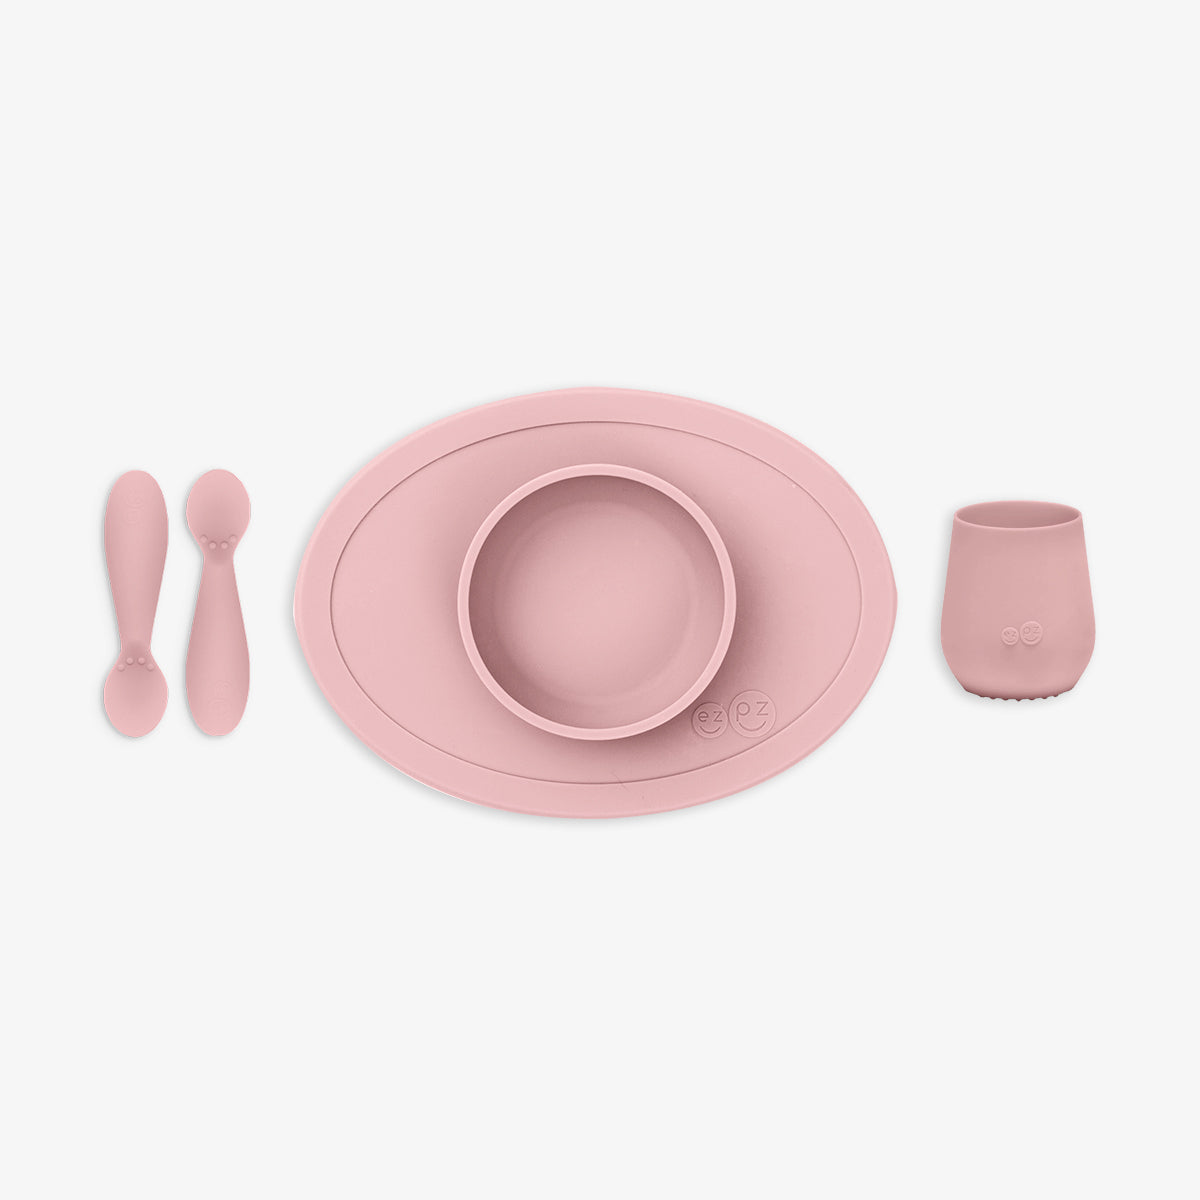 First Foods Set in Blush by ezpz / The Original All-In-One Silicone Plates & Placemats that Stick to the Table